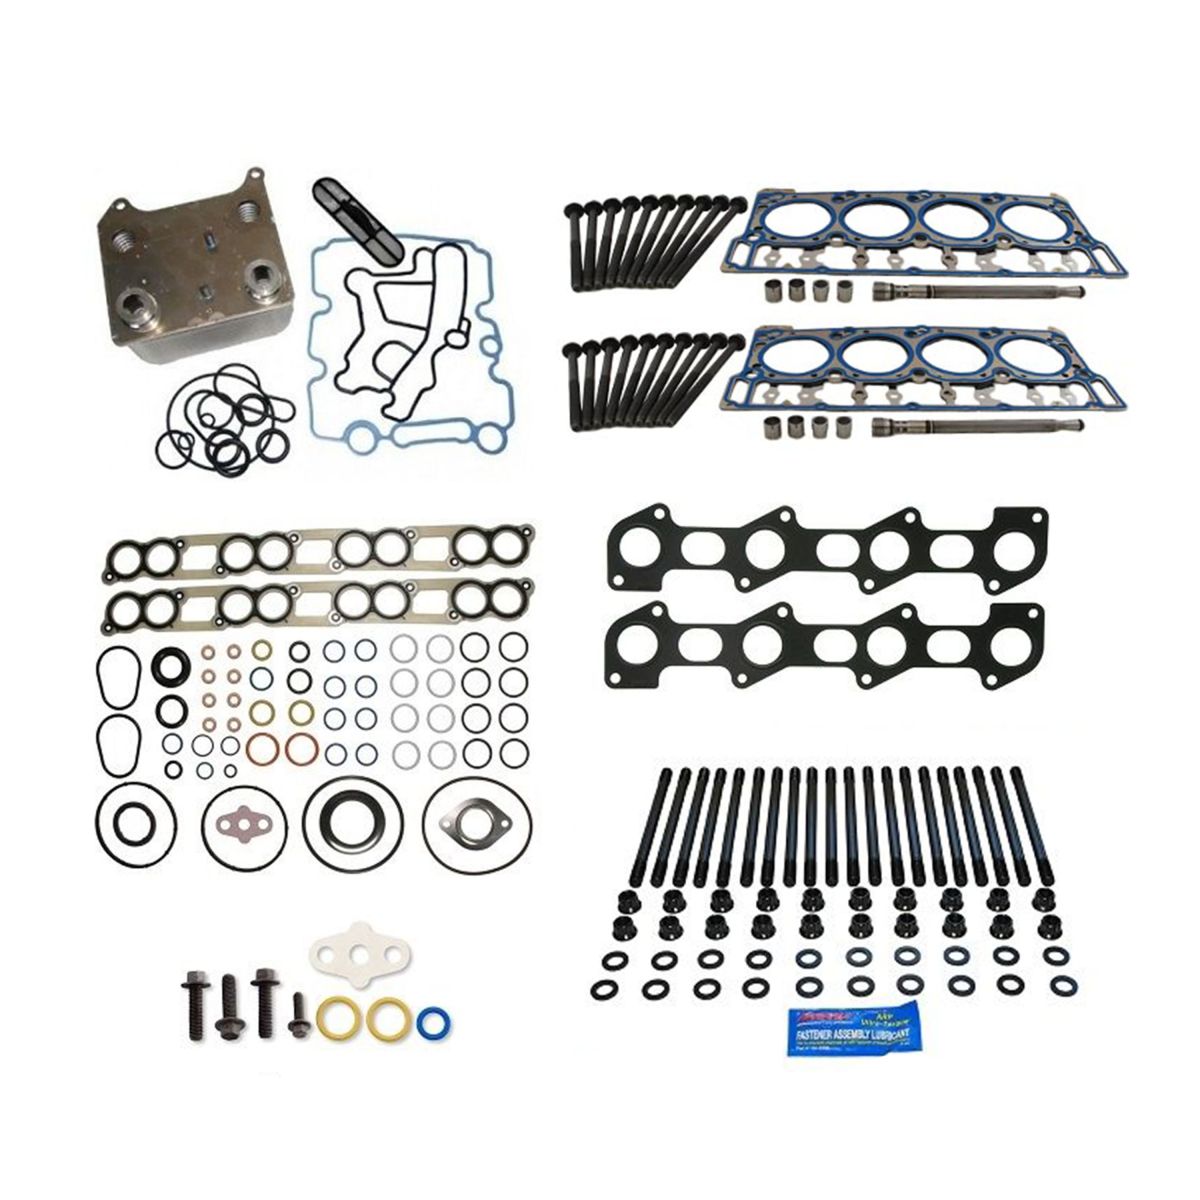 Rudy's Performance Parts - Rudy's OEM Total Solution Kit For 03-07 6.0 Powerstroke